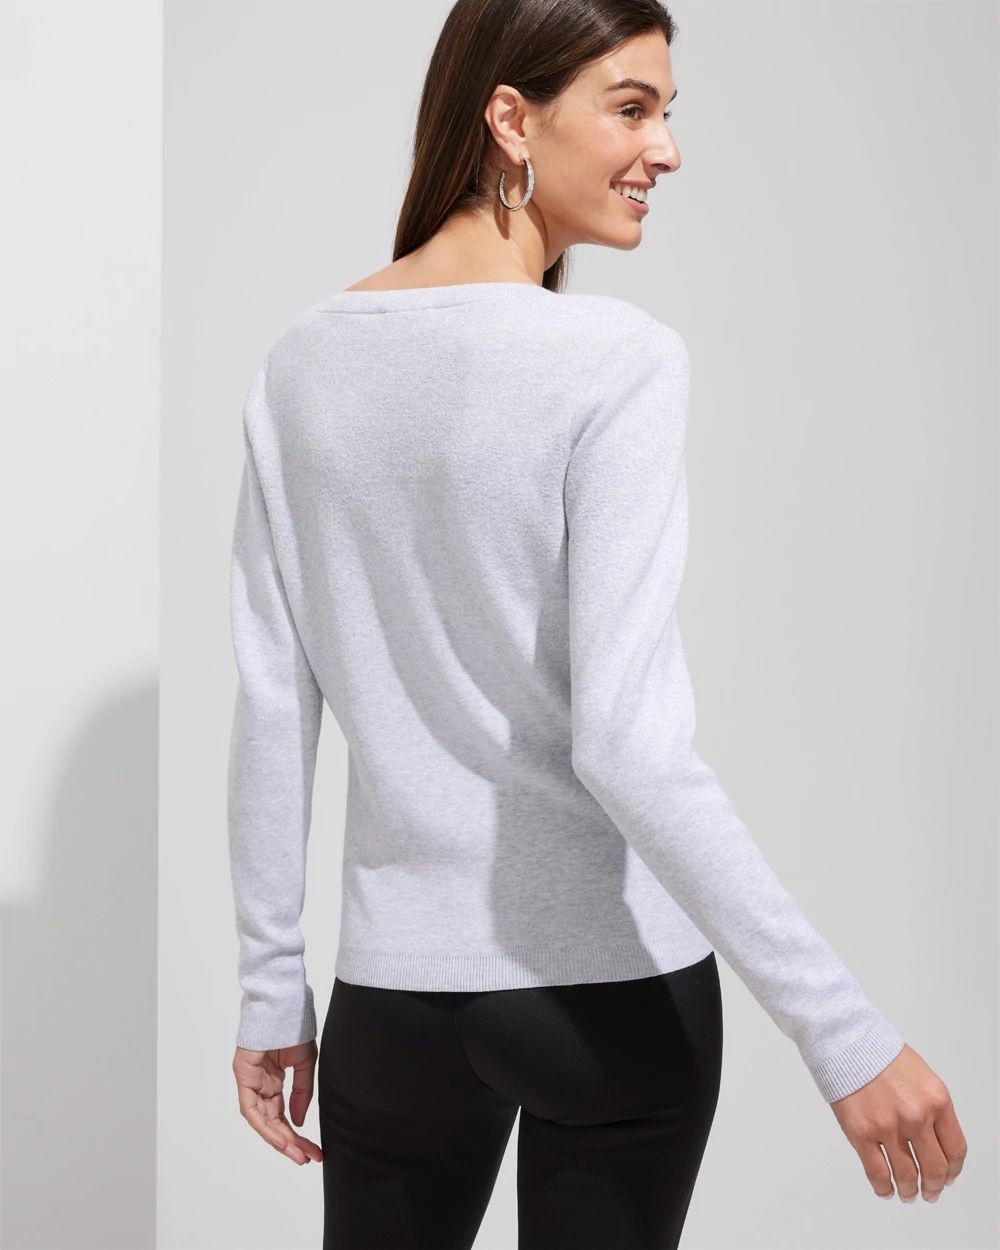 Outlet WHBM Long Sleeve Ombre Pullover click to view larger image.